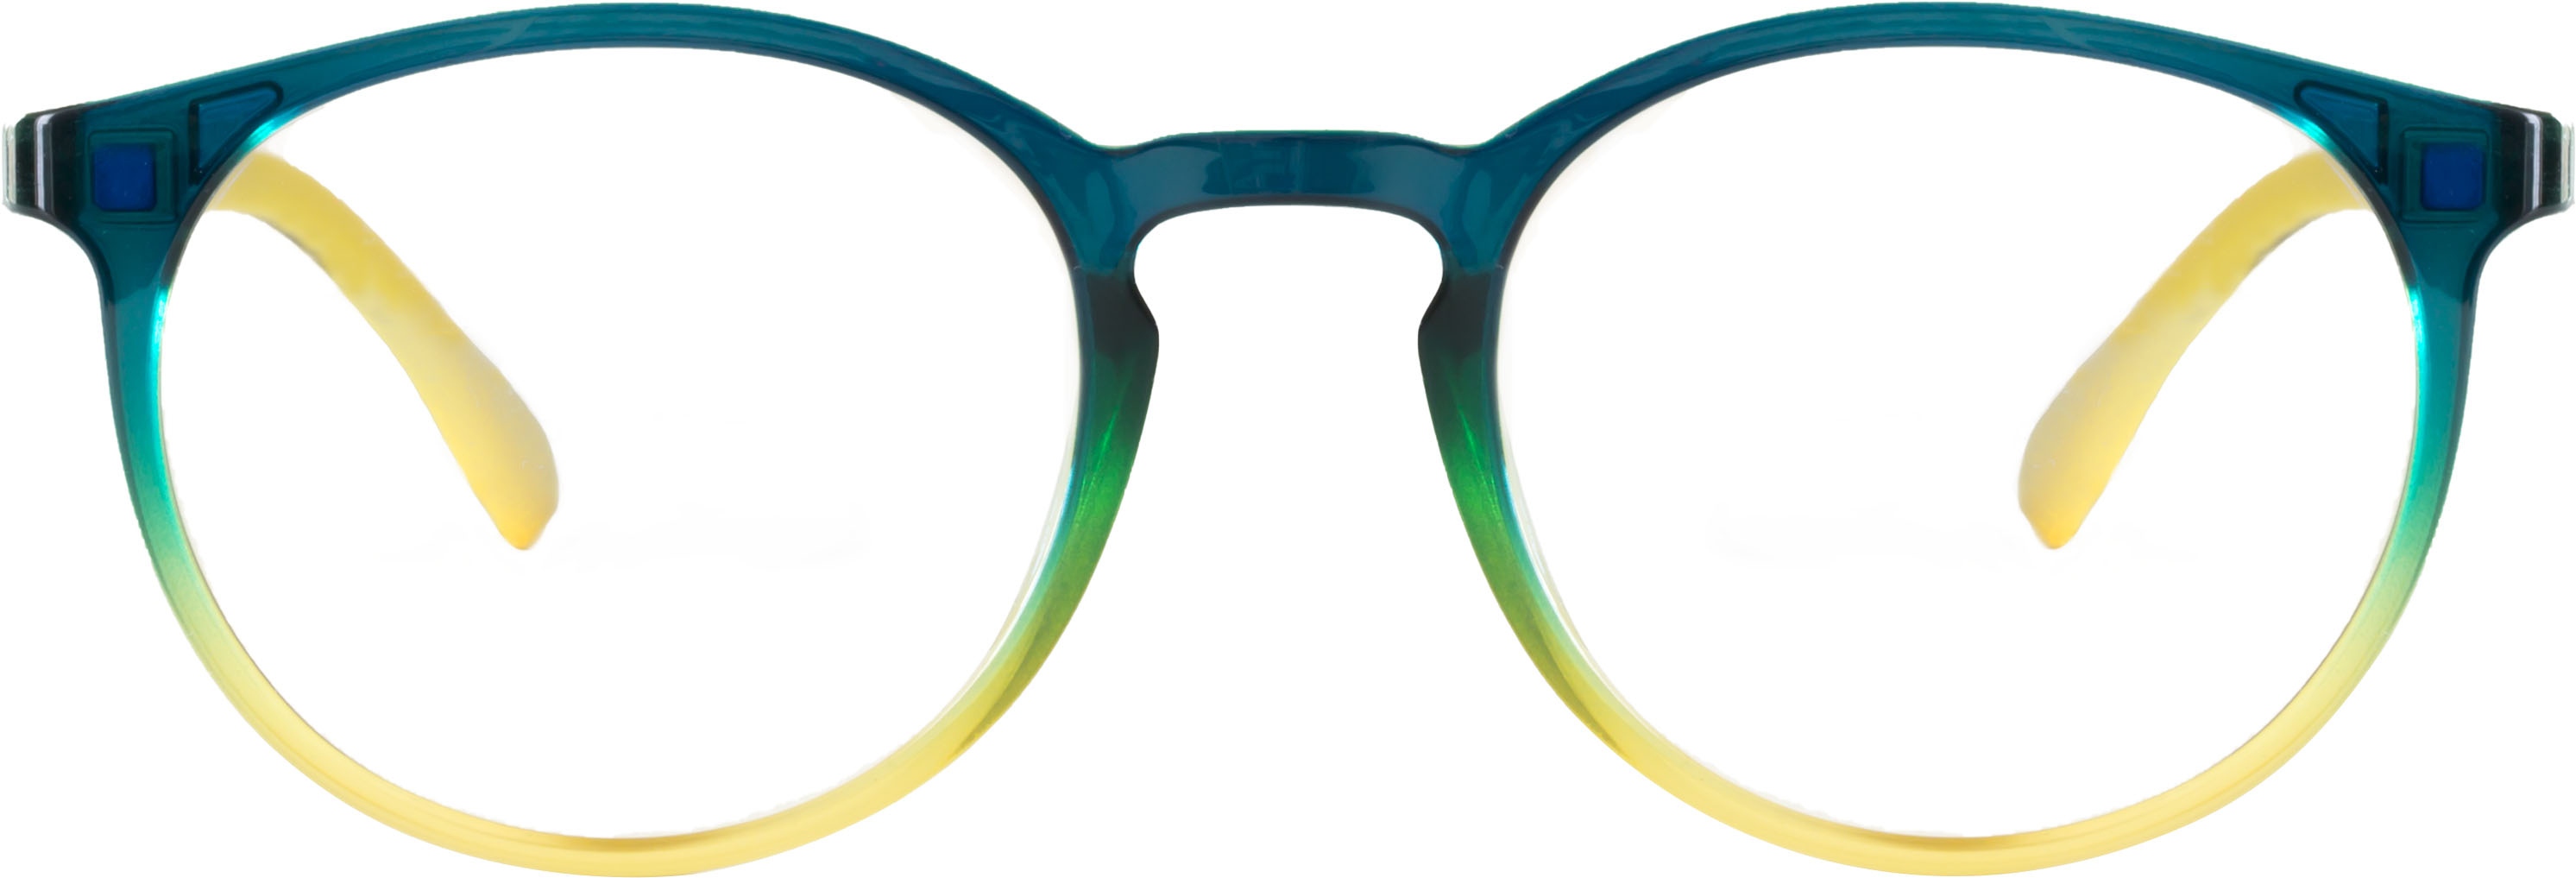 Left View: Wavebalance - BlueDuo, Poet, Blue Light Reducing Glasses with Magnetic Sunglass Clip-On- Tie Dye - Blue & Yellow